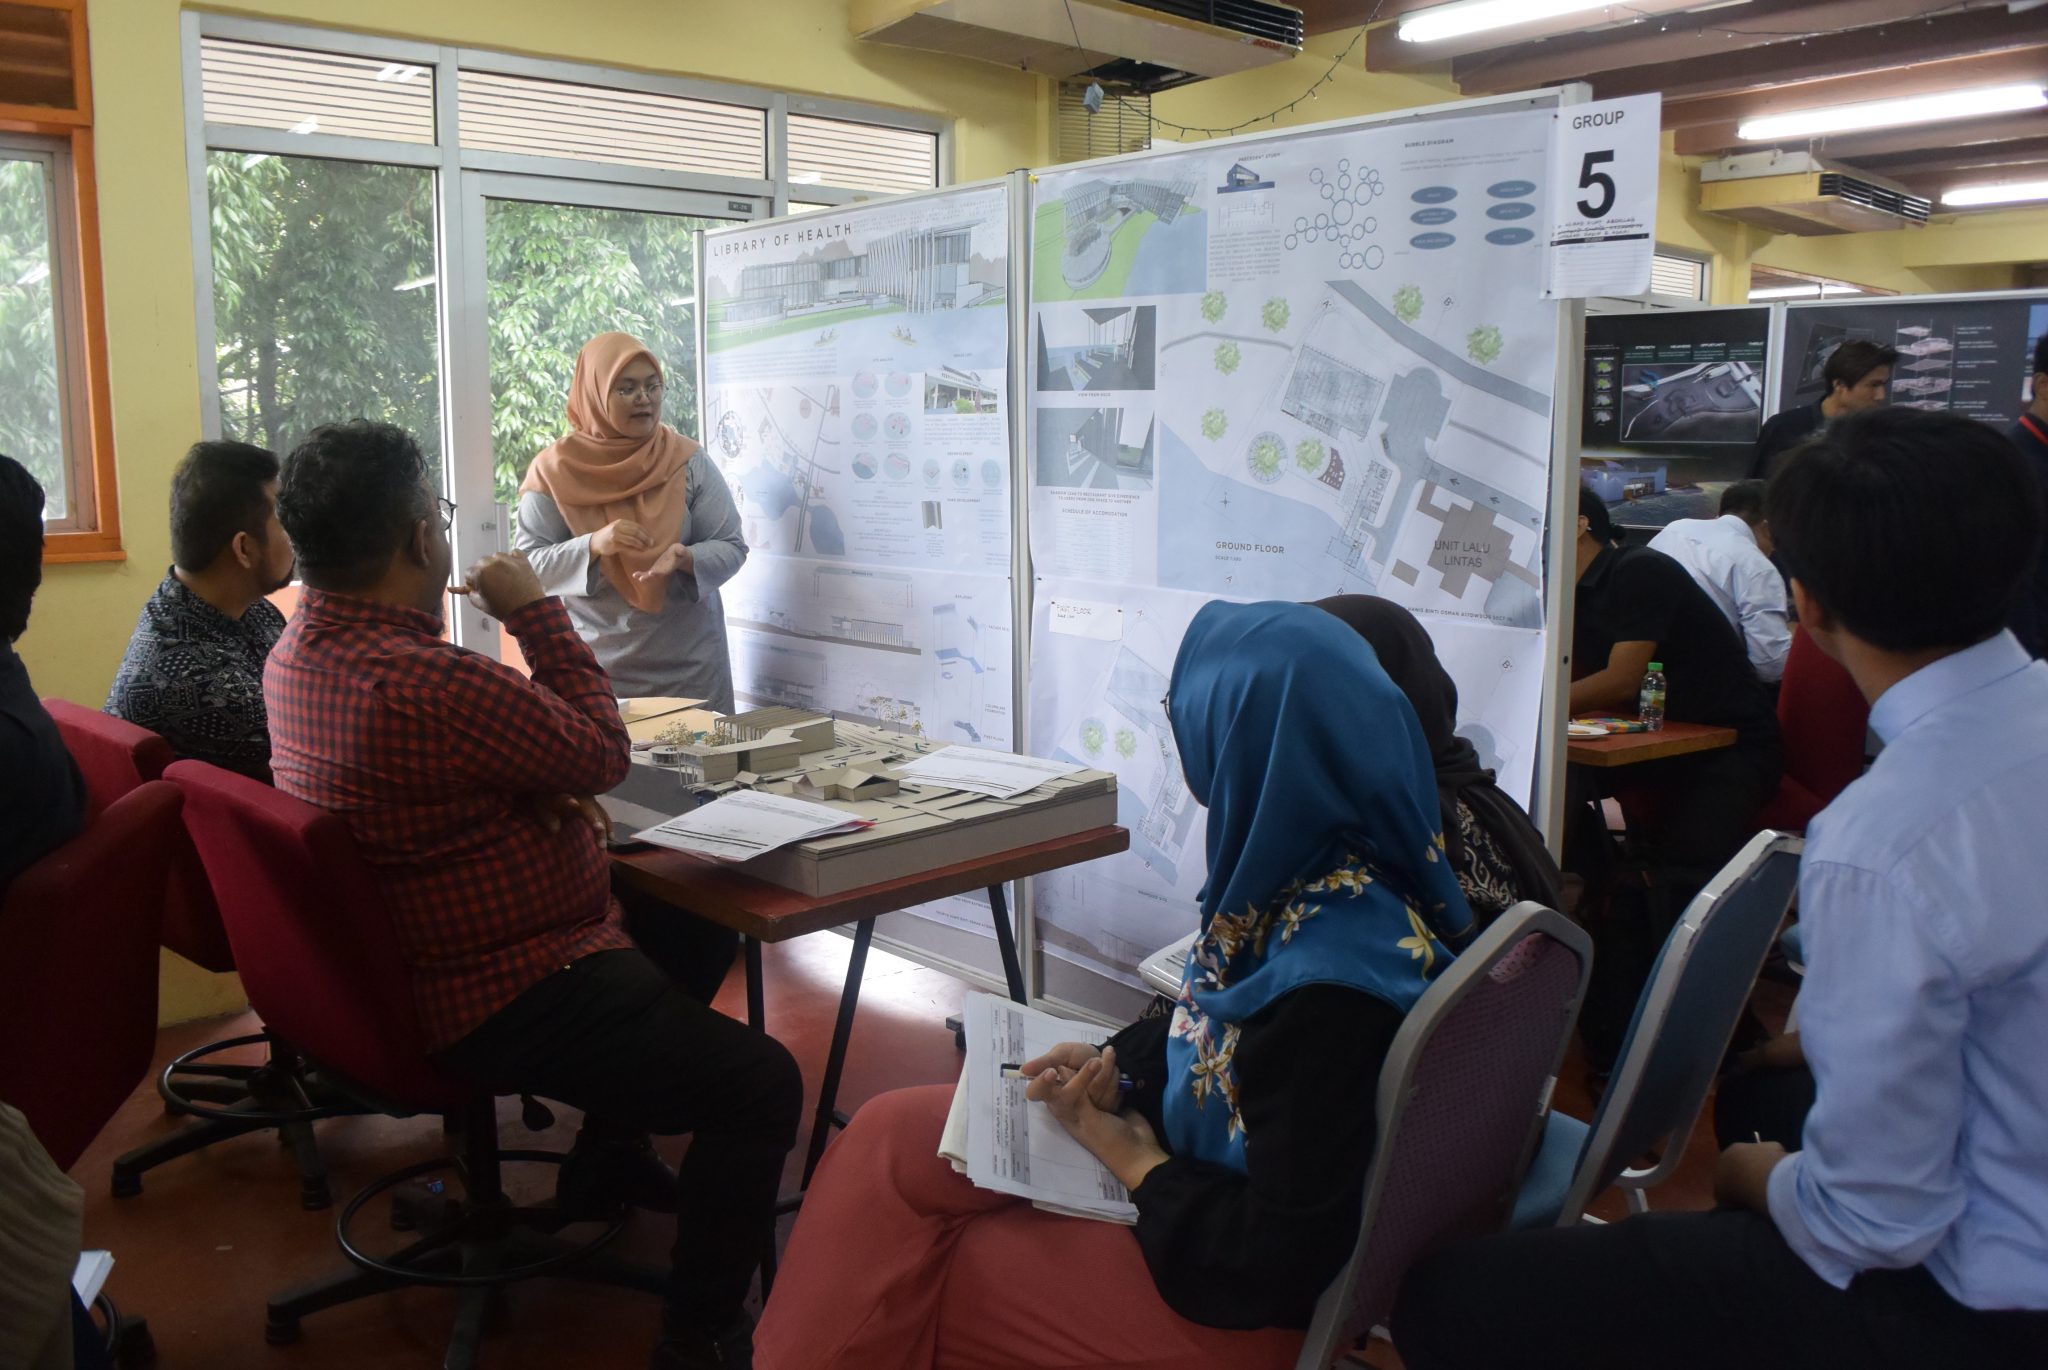 External Crit Session of UTM SPACE Architecture Students – NRY Architects